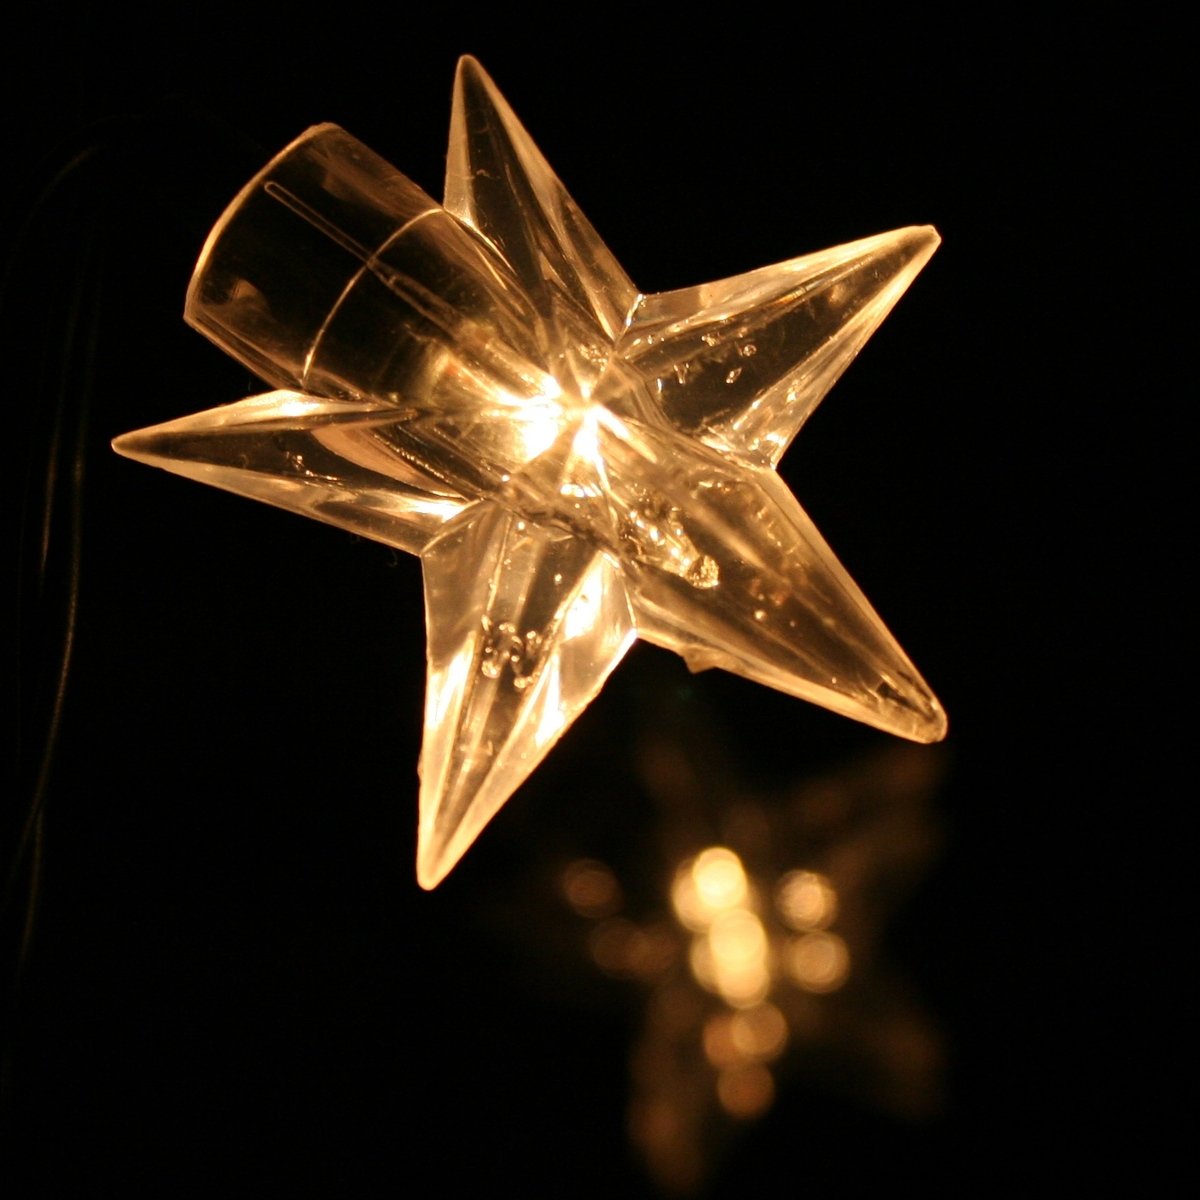 lights with a star shape on top in the dark